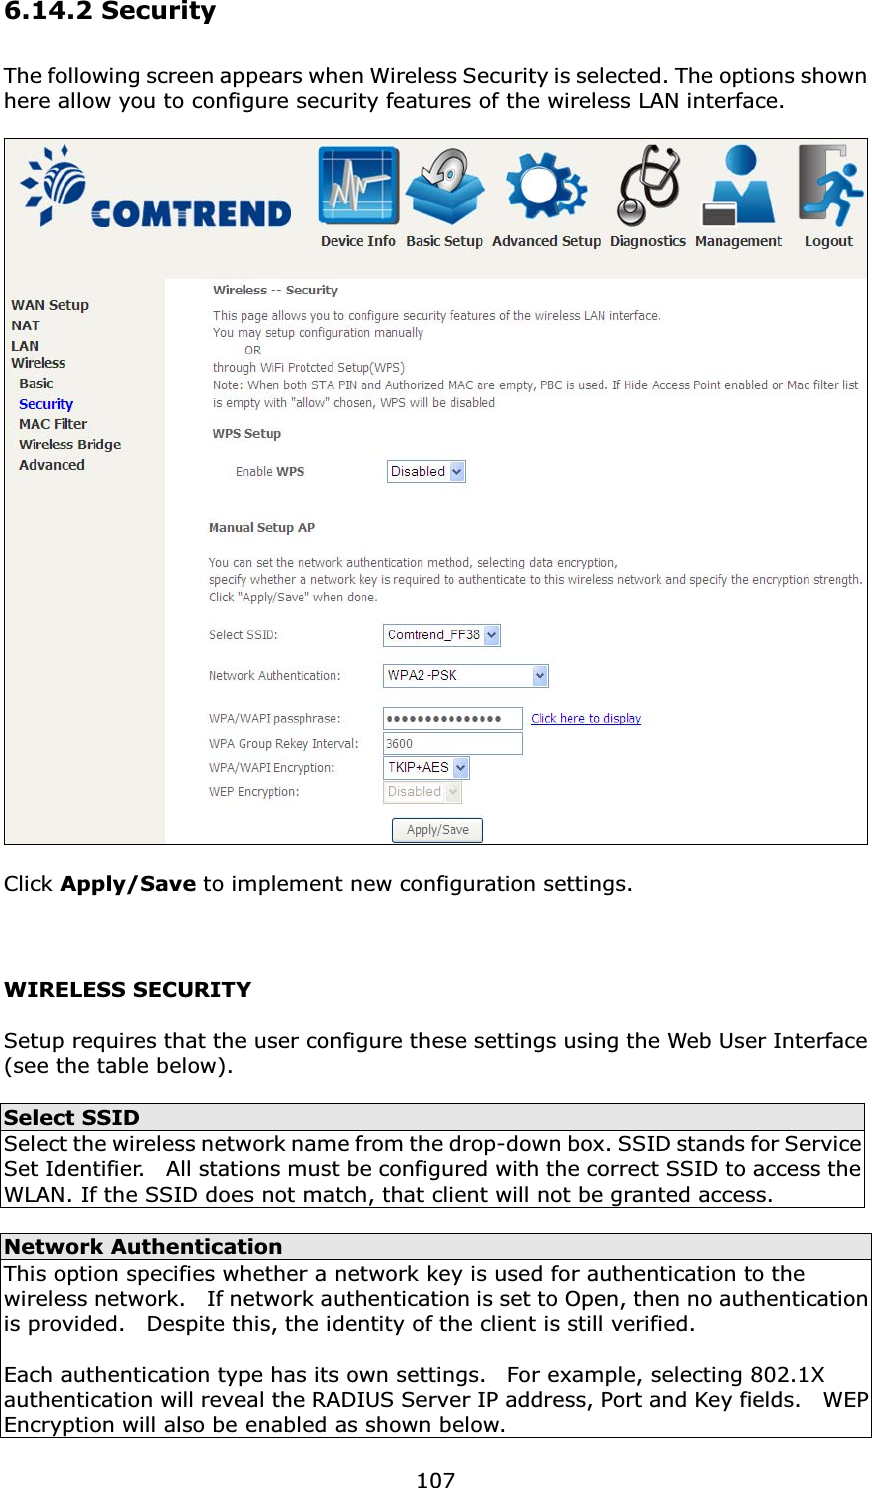 1076.14.2 SecurityThe following screen appears when Wireless Security is selected. The options shown here allow you to configure security features of the wireless LAN interface.Click Apply/Save to implement new configuration settings.WIRELESS SECURITYSetup requires that the user configure these settings using the Web User Interface (see the table below).Select SSIDSelect the wireless network name from the drop-down box. SSID stands for Service Set Identifier.    All stations must be configured with the correct SSID to access the WLAN. If the SSID does not match, that client will not be granted access.Network AuthenticationThis option specifies whether a network key is used for authentication to the wireless network.    If network authentication is set to Open, then no authentication is provided.    Despite this, the identity of the client is still verified.   Each authentication type has its own settings.    For example, selecting 802.1X authentication will reveal the RADIUS Server IP address, Port and Key fields.    WEP Encryption will also be enabled as shown below.